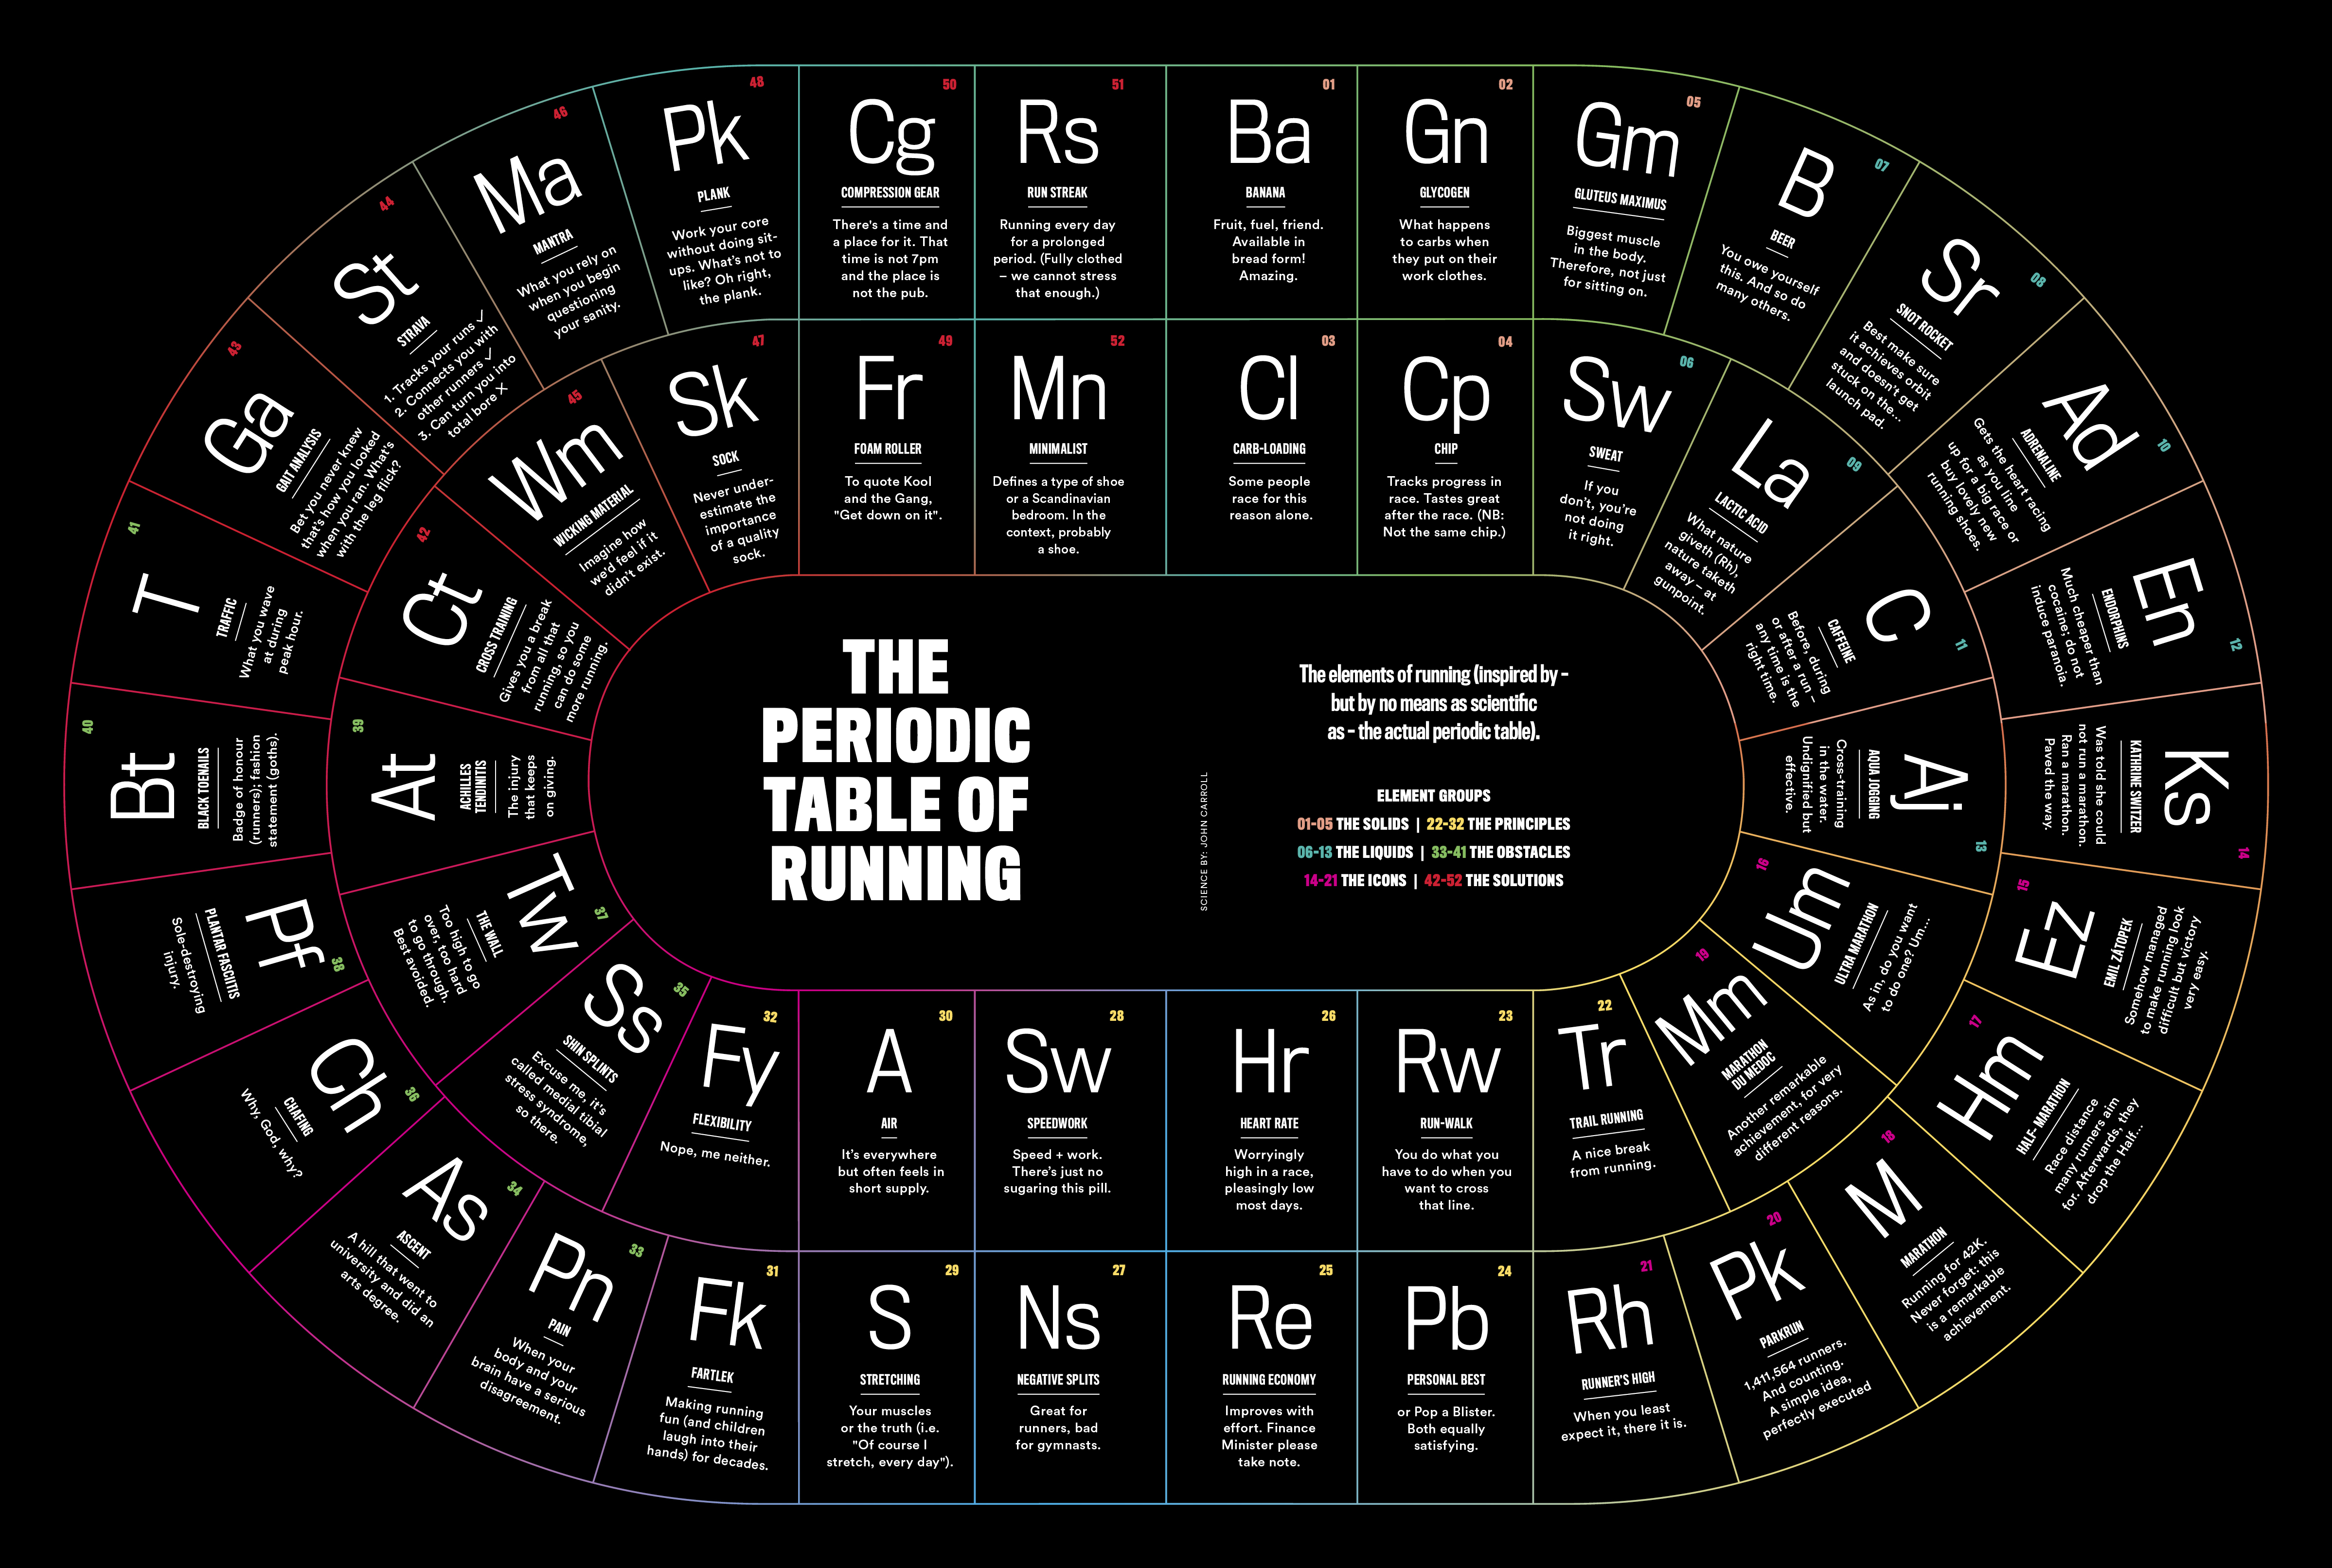 The Periodic Table of Running